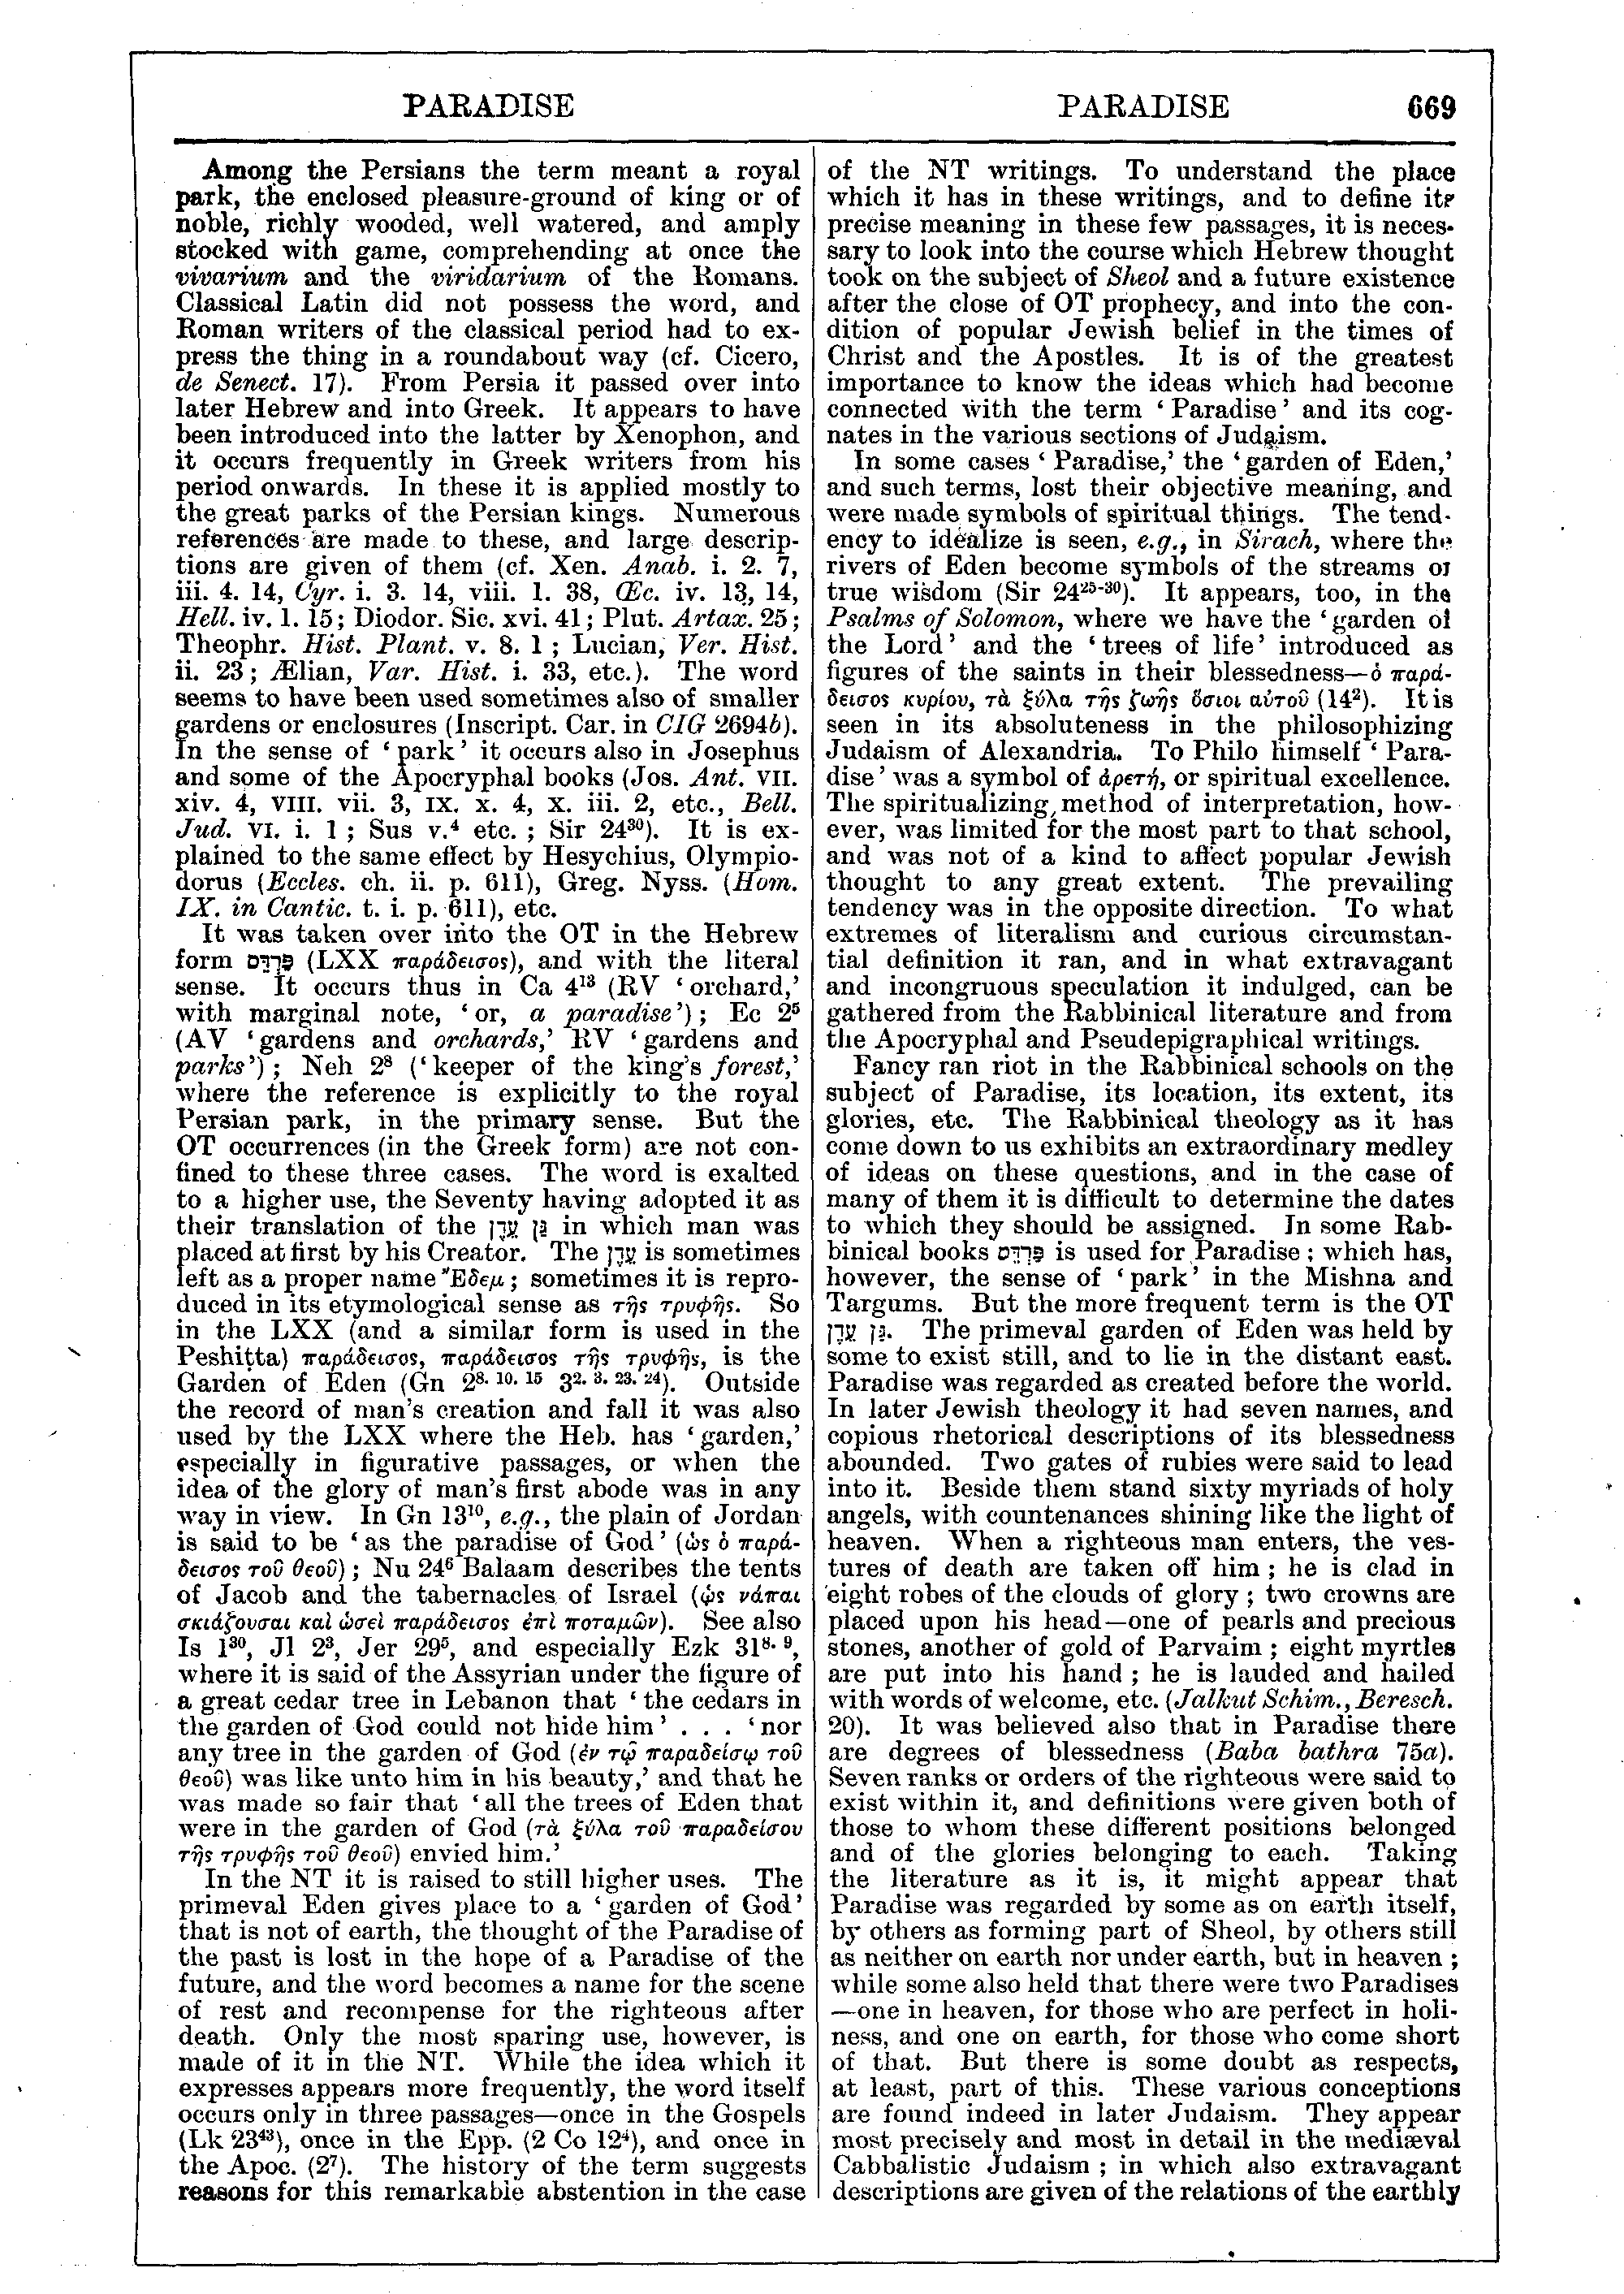 Image of page 669